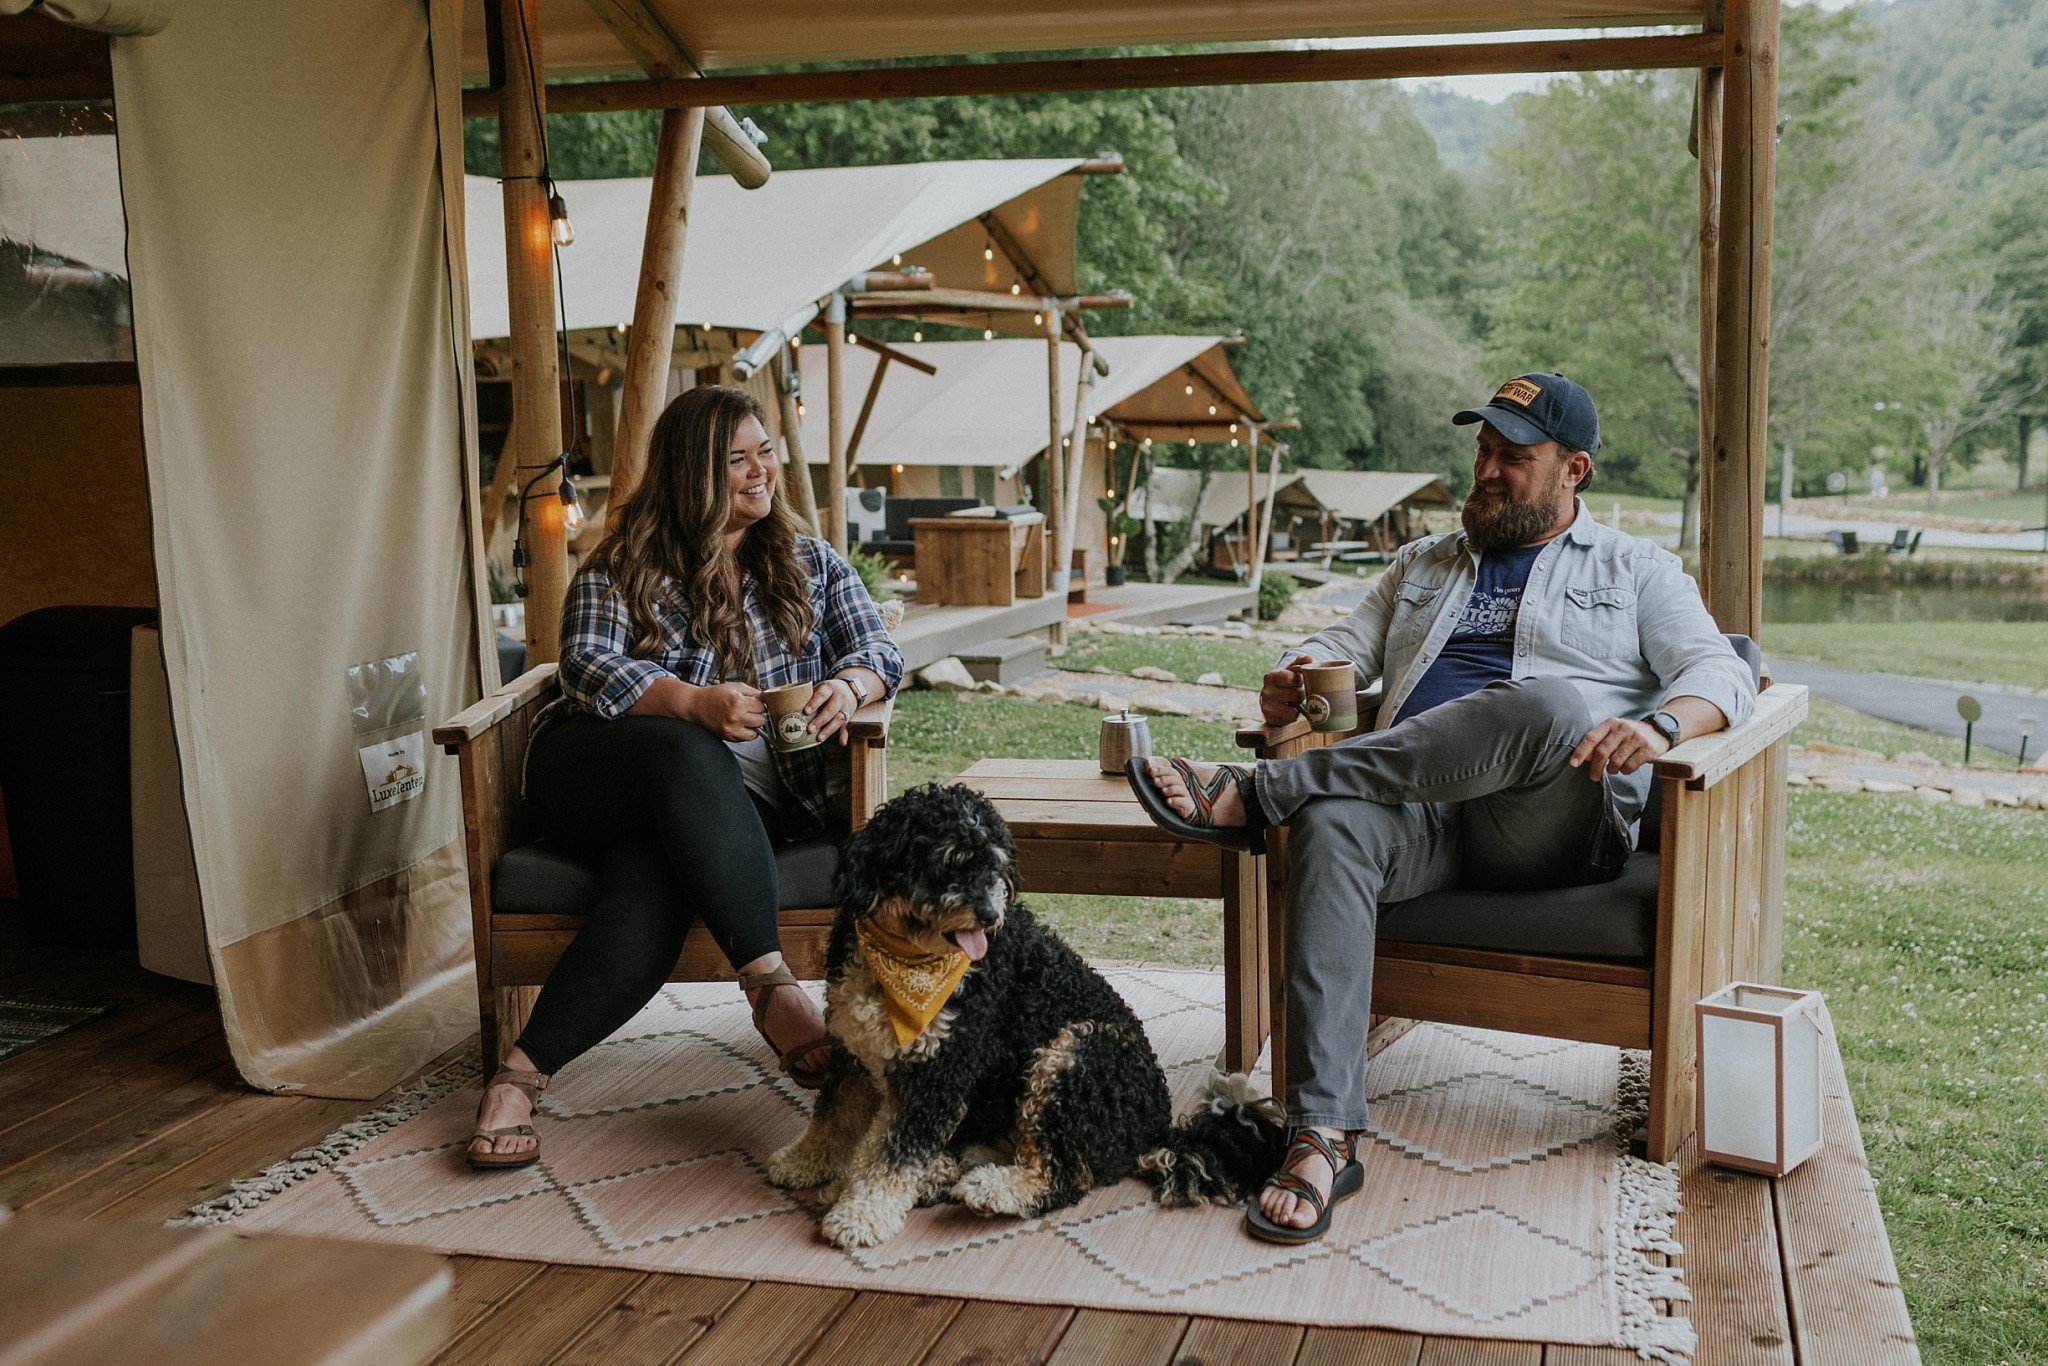 glamping-retro-camping-hiking-retreat-airstream-treehouse-tent-erwin-tennessee-appalachian-mountains-unicoi-trail-outdoor-wedding-campsite-branding-katy-sergent-photography_0066.jpg